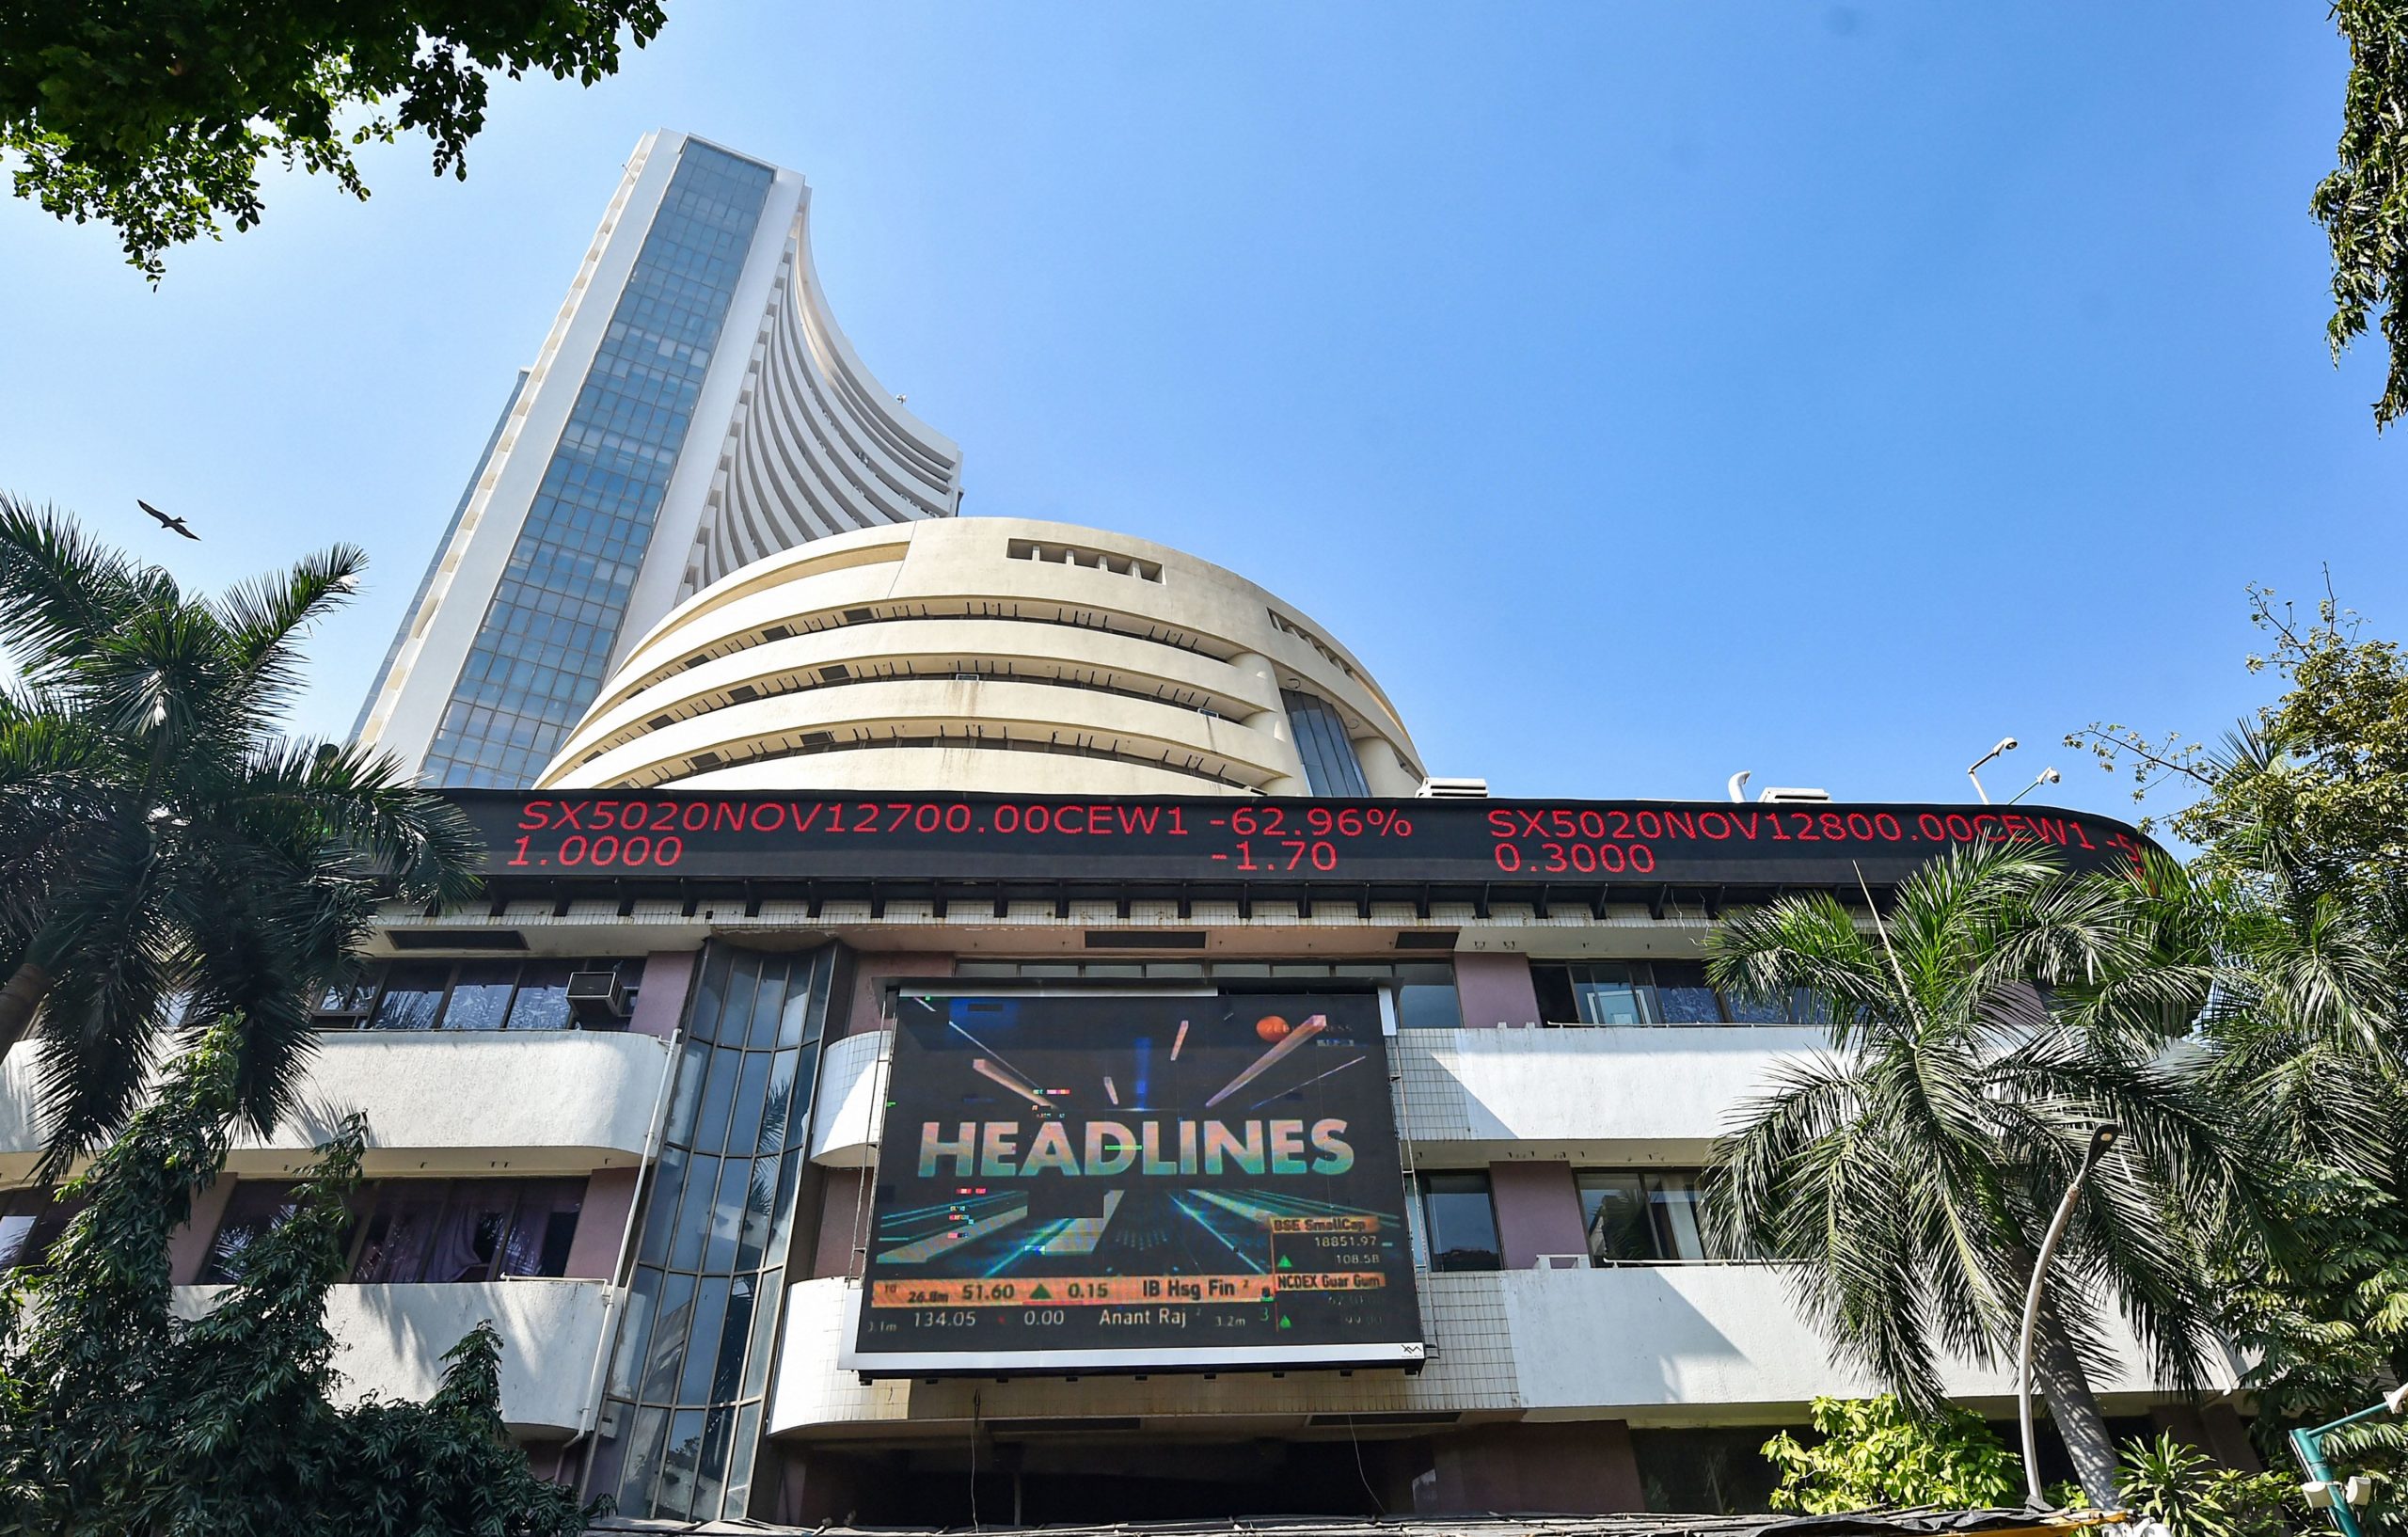 Trending Stocks: Future Retail, Airtel, Hinduja, Hindalco and others in news today